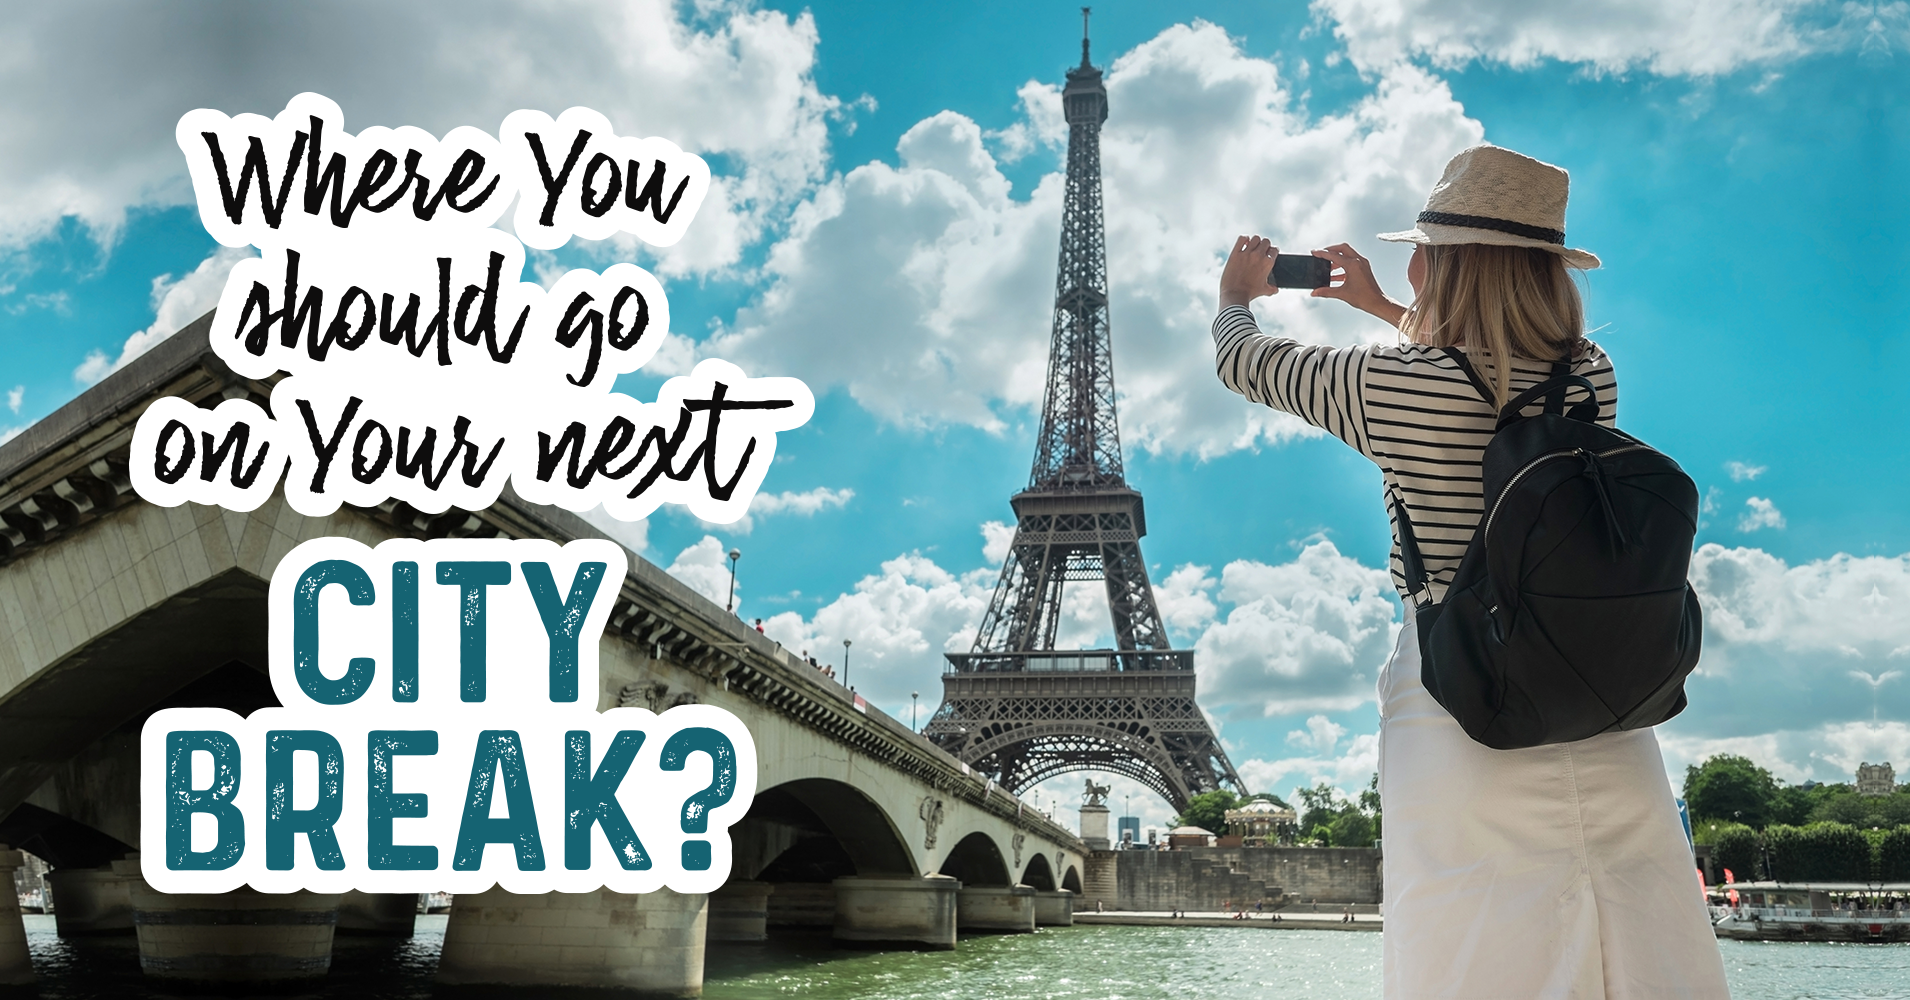 Where Should You Go On Your Next City Break? Question 11 - With whom